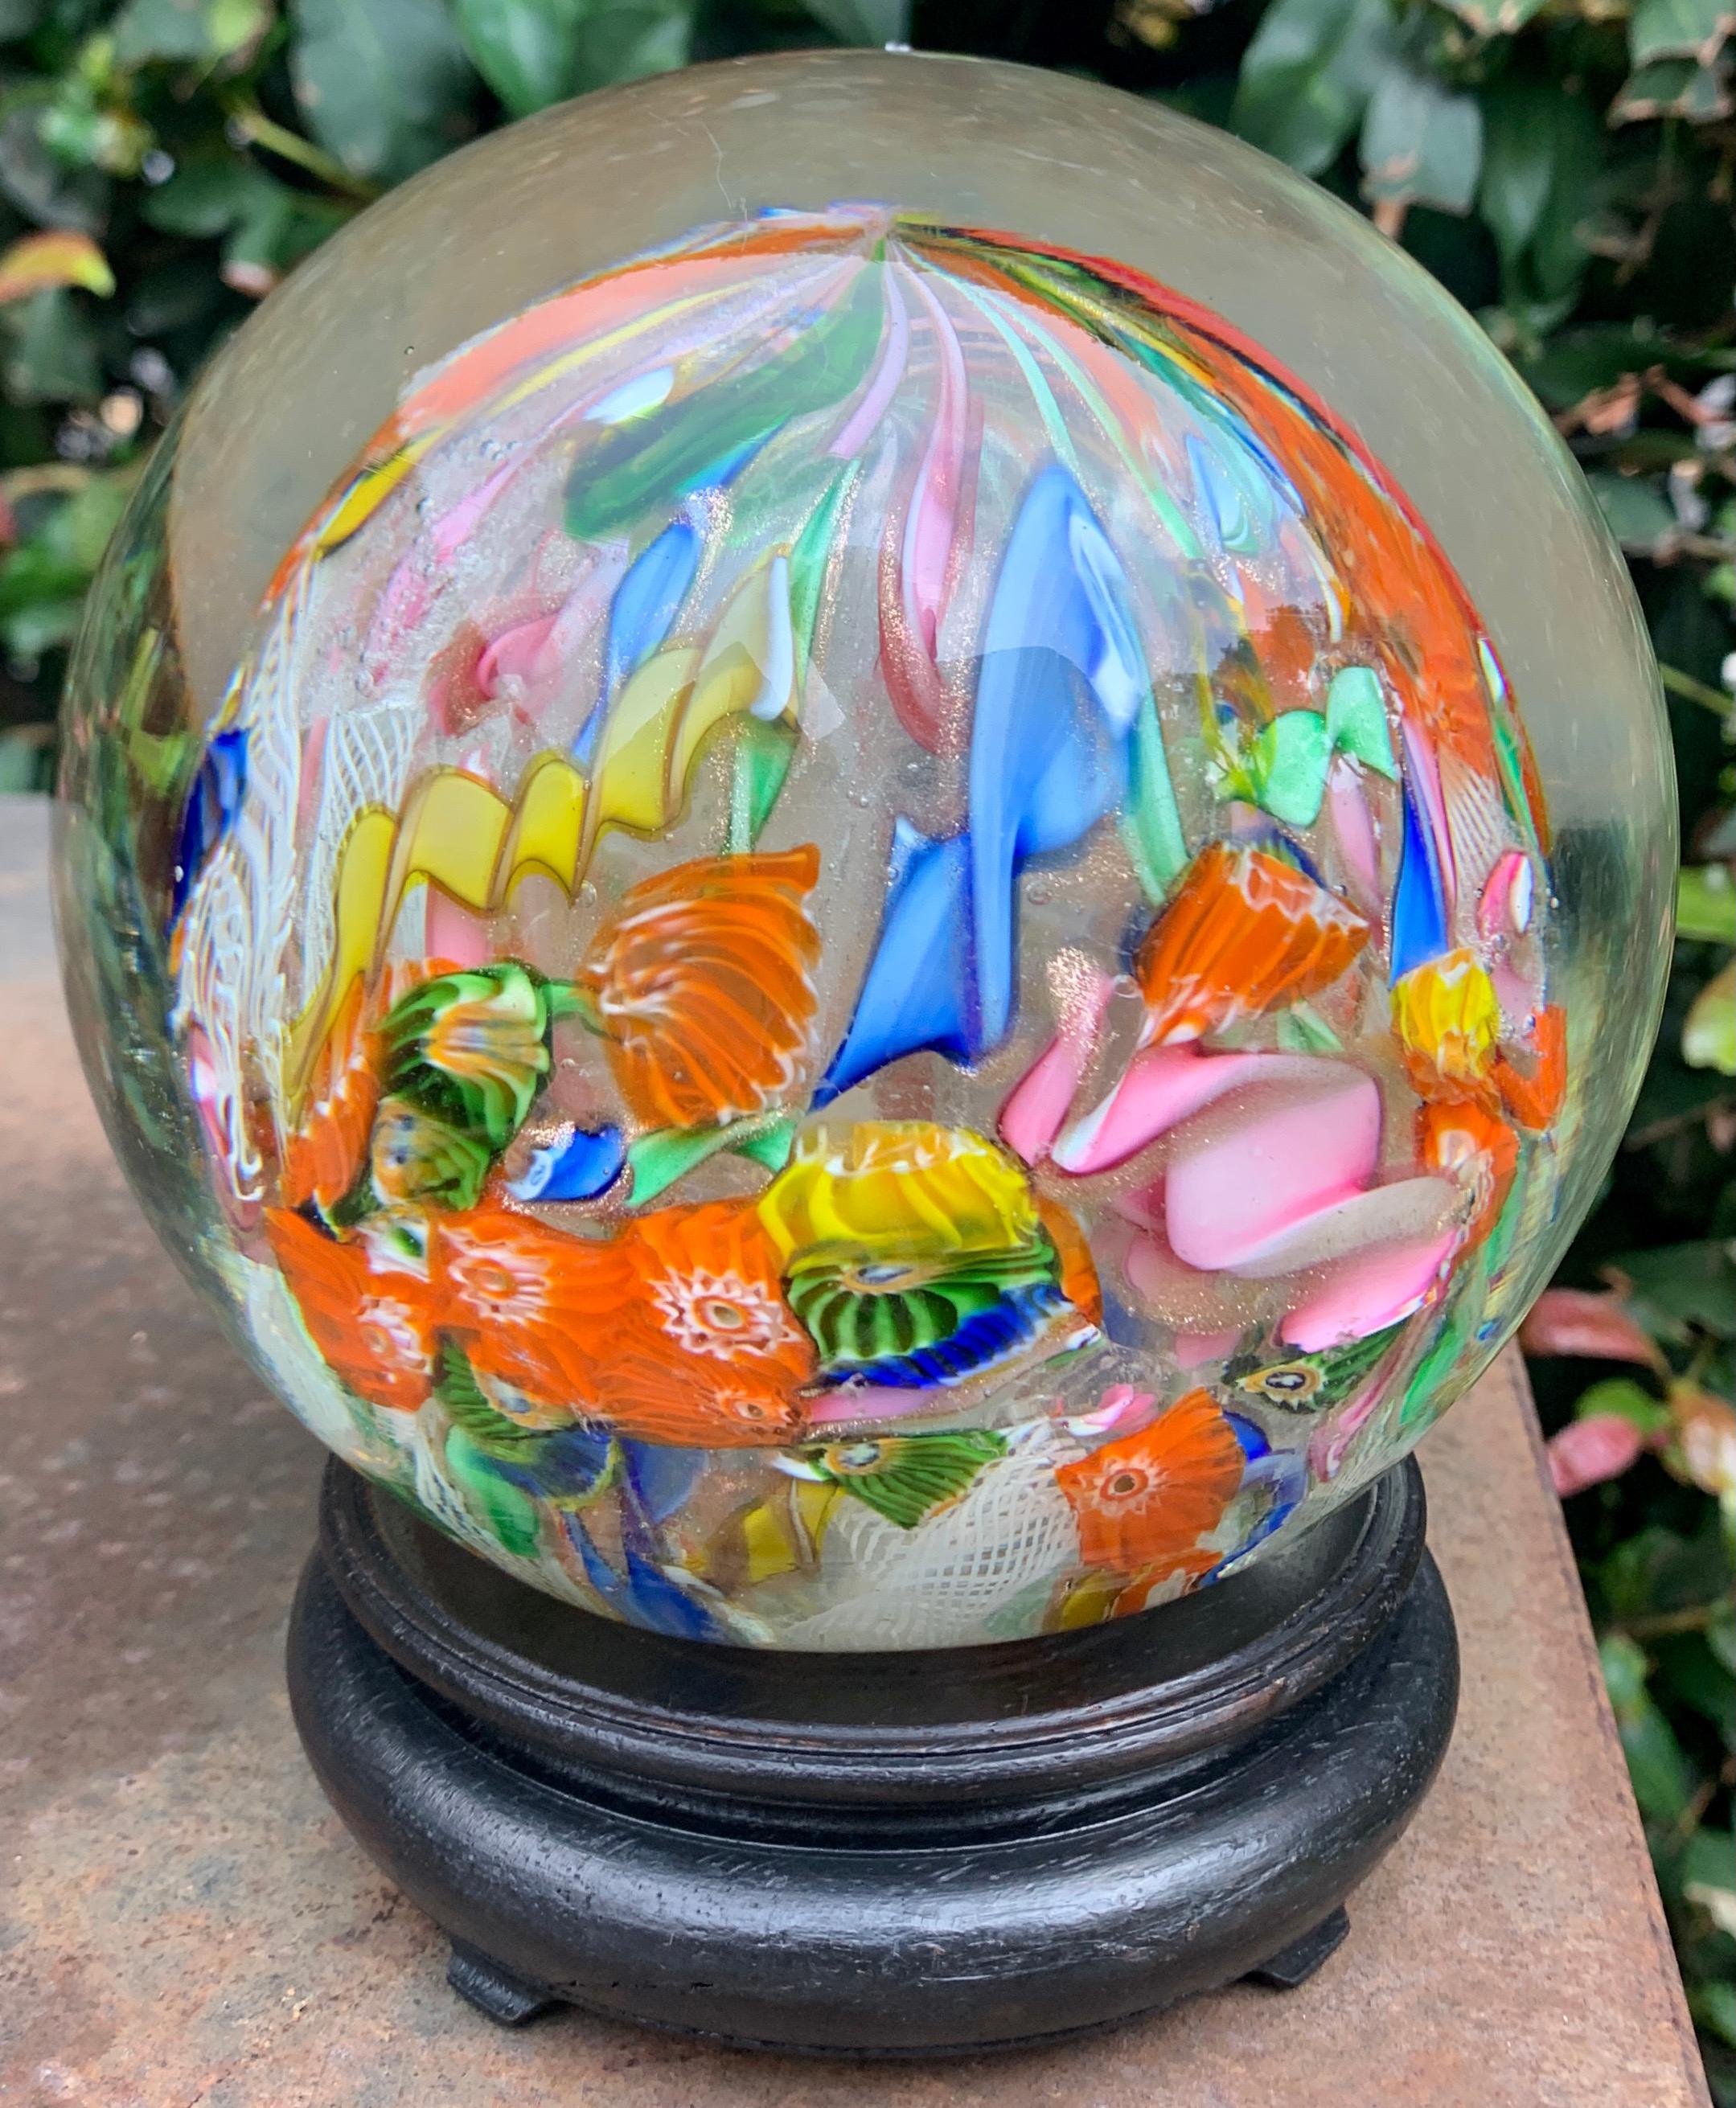 A very large Italian Murano Paperweight. A spectacular example of hand blown work combining, not only many colors, but a large array of ribbons, spirals, etc. Added to the color and size is the addition of gold, which makes this a wonderful